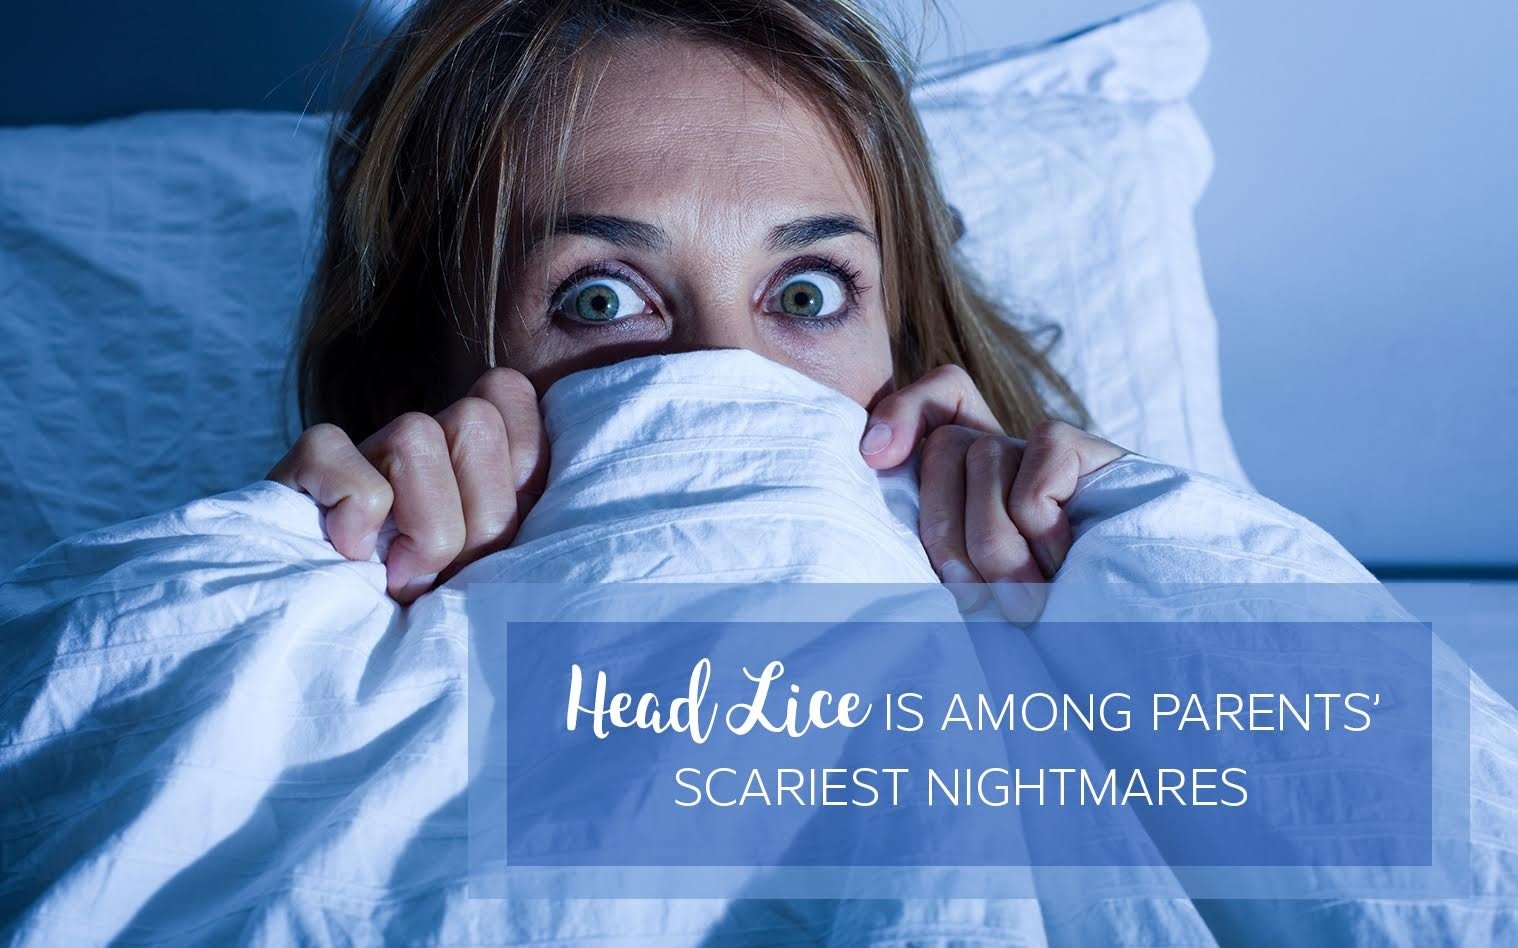 Head lice removal scares a mother hiding in bed because head lice is among parents’ scariest nightmares visit Lice Clinics of America - West Palm Beach for more information